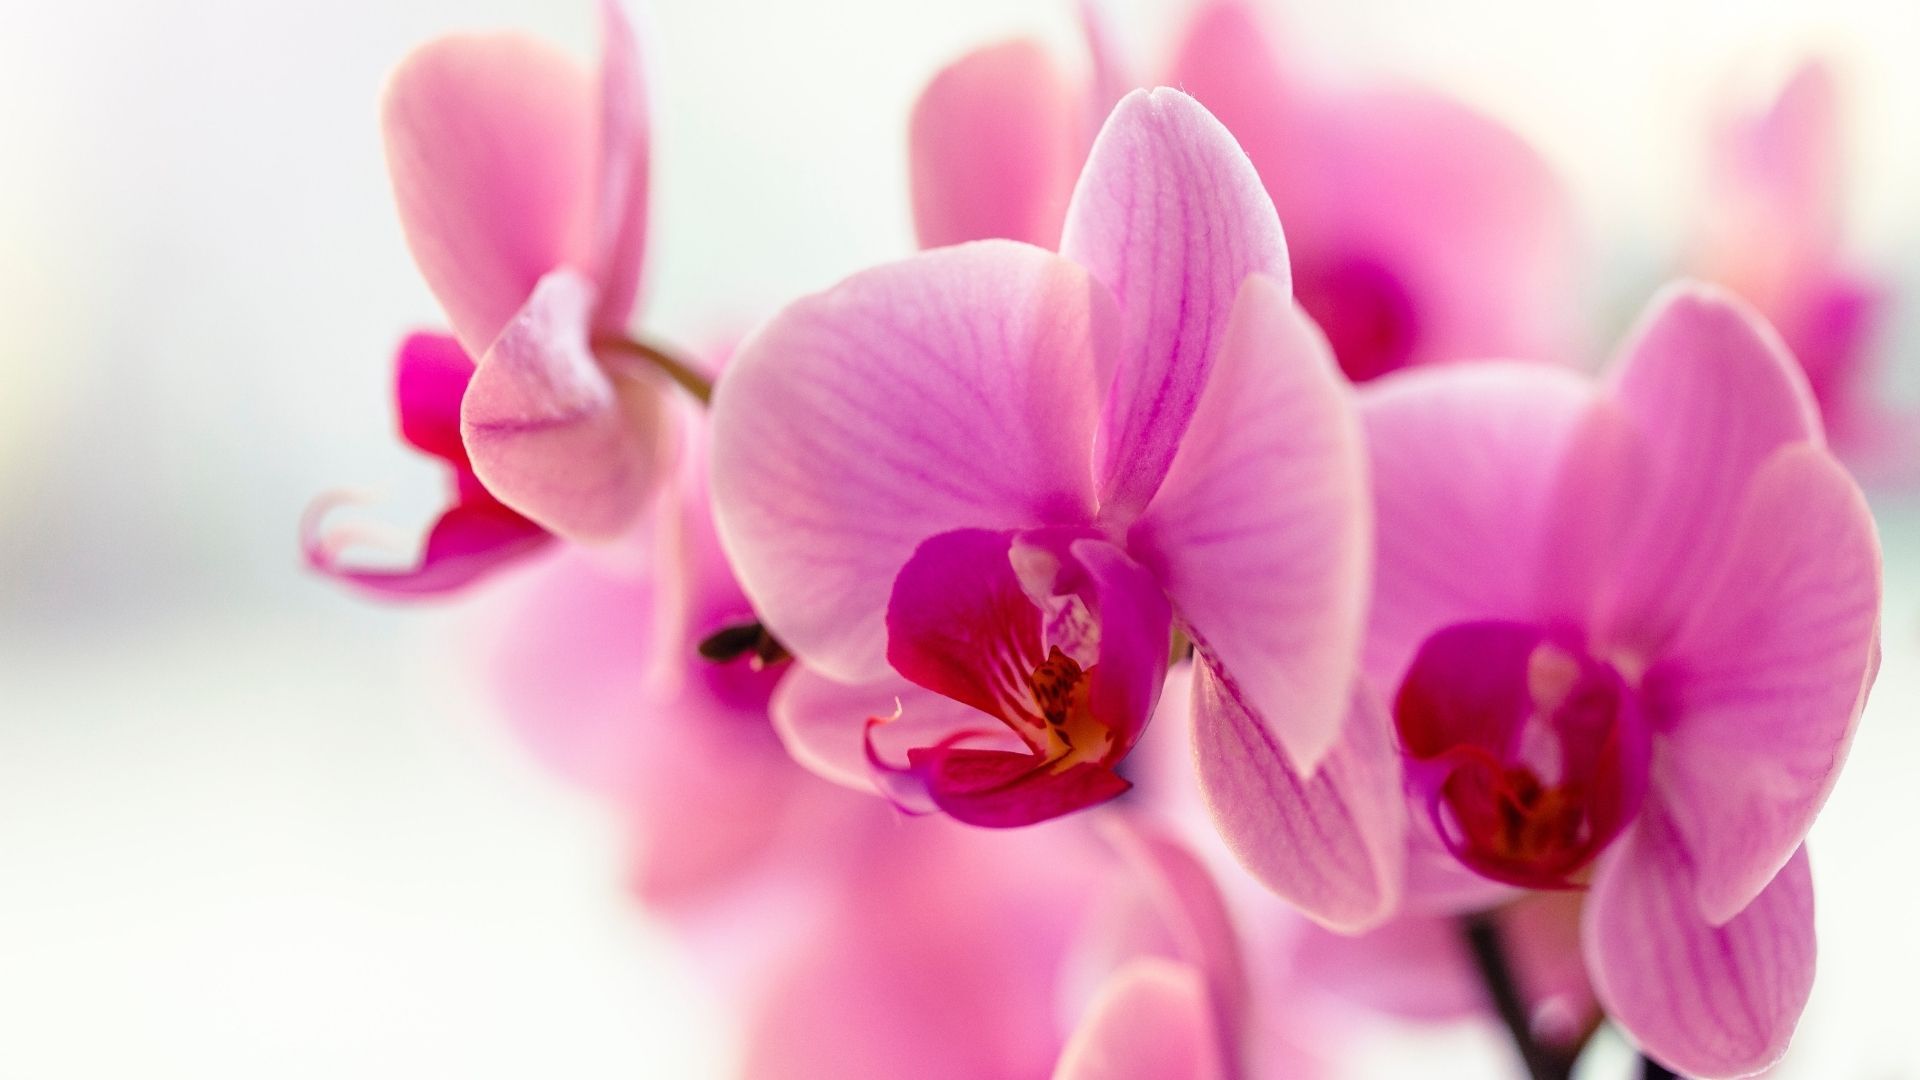 Most beautiful flowers: Orchid